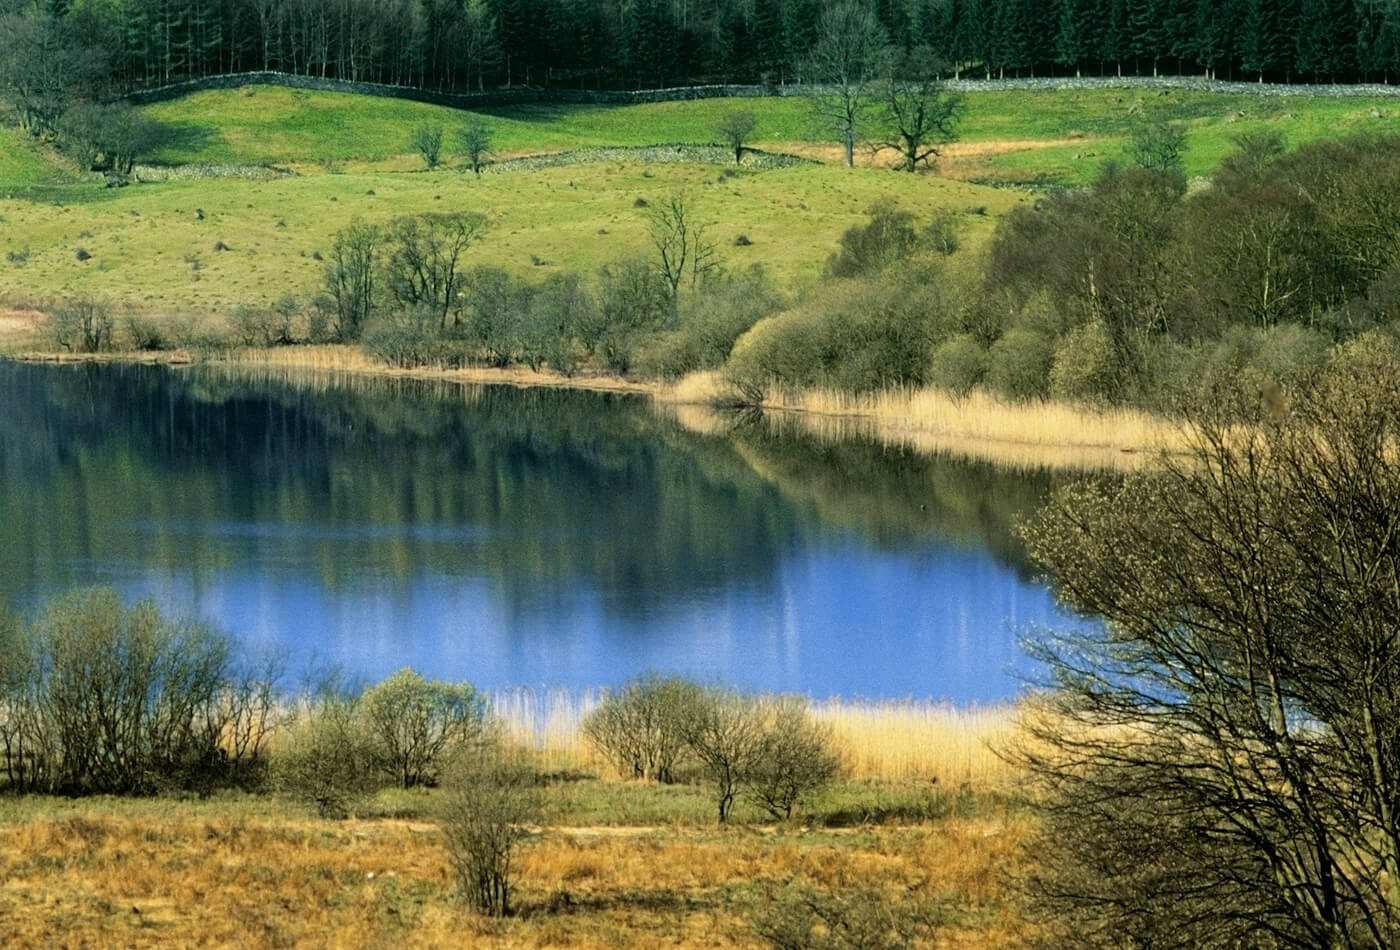 A landscape view of a lake and hills in the Lake District